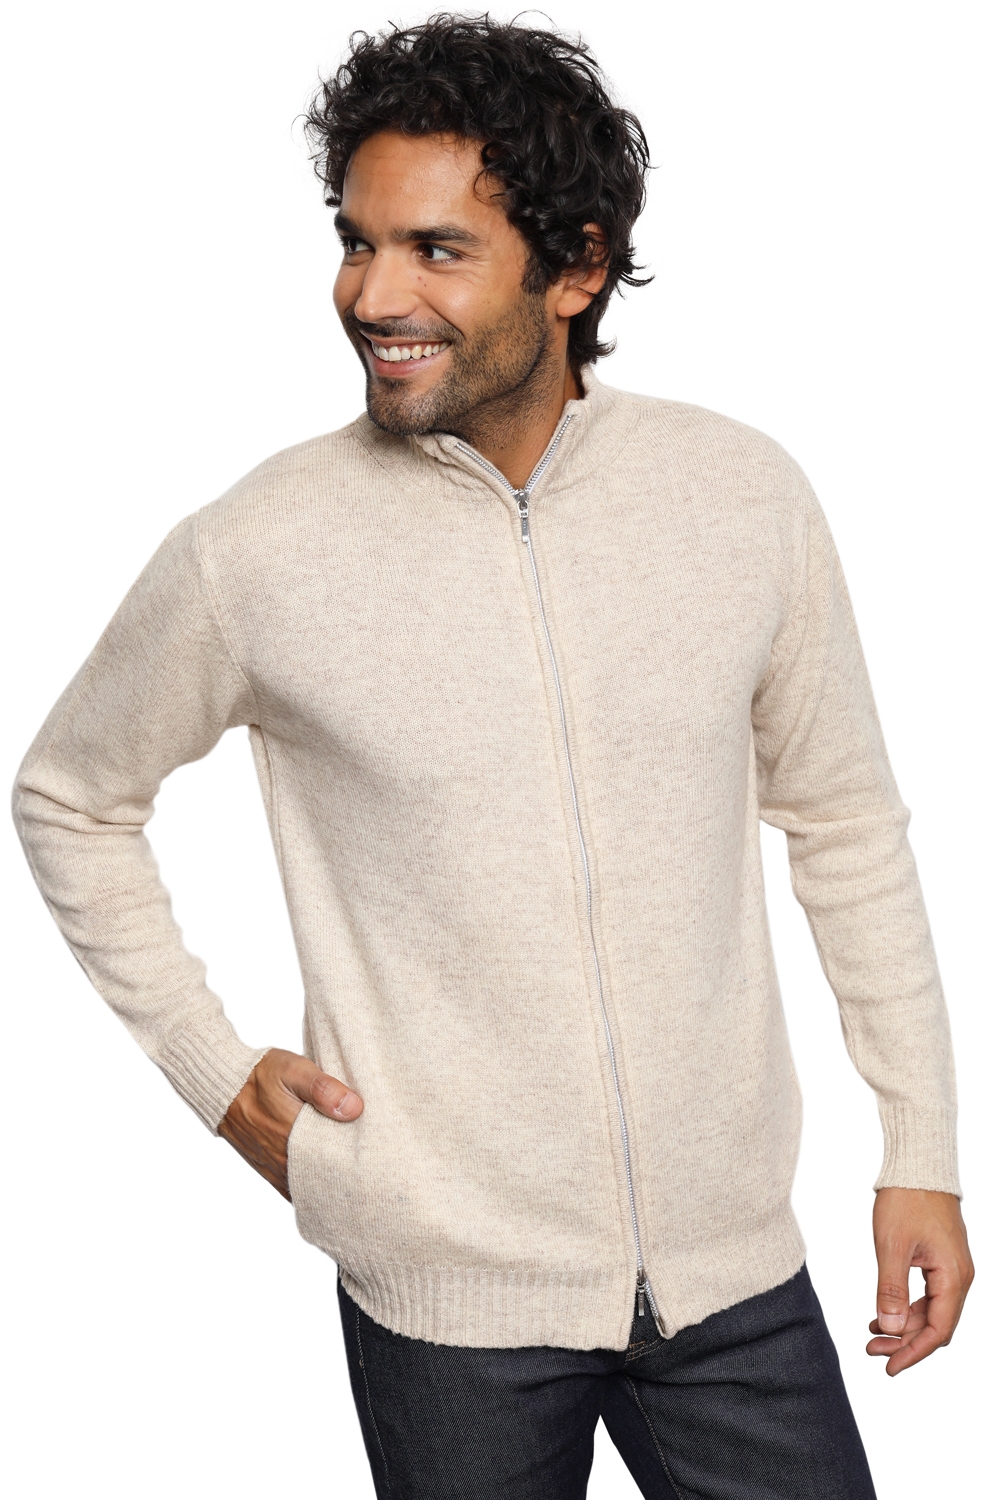 Chameau pull homme zip capuche clyde nature s